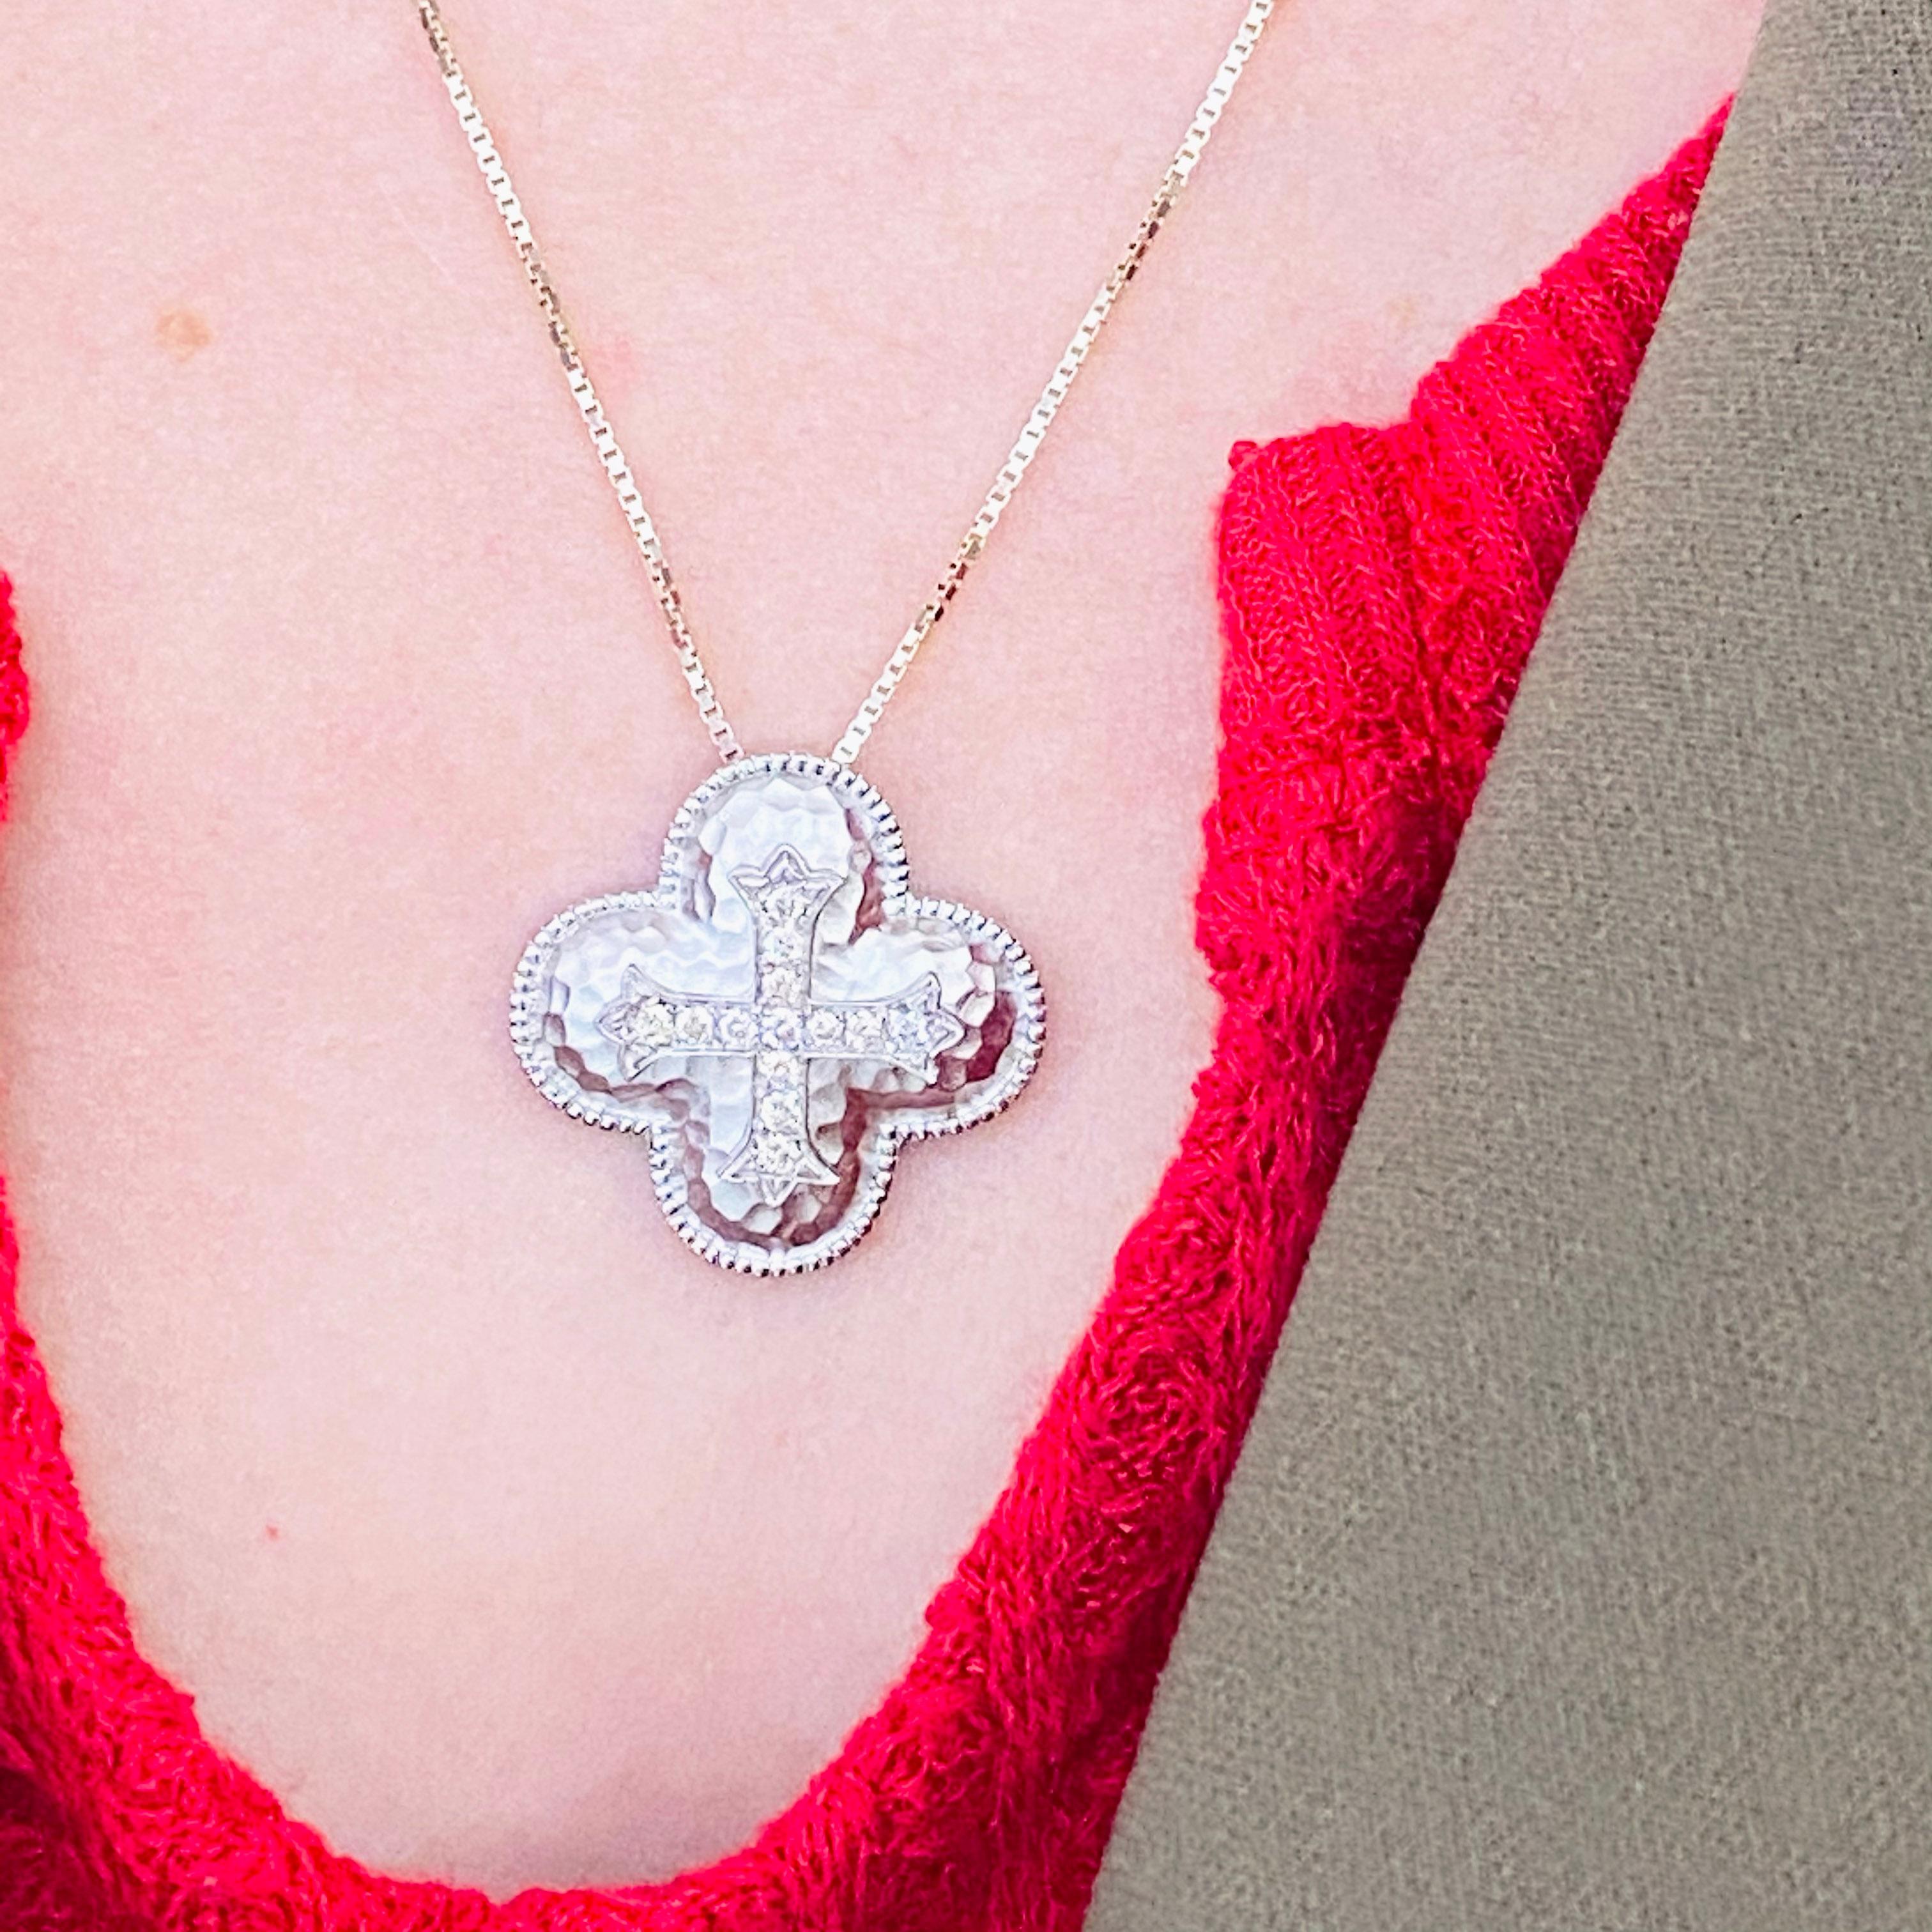 This gorgeous diamond cross pendant is a stunning and striking design. The cross pendant is made in 925 sterling silver with genuine, natural diamonds. The pendant was designed to be hammered with the diamond cross in the center.  The metal is a